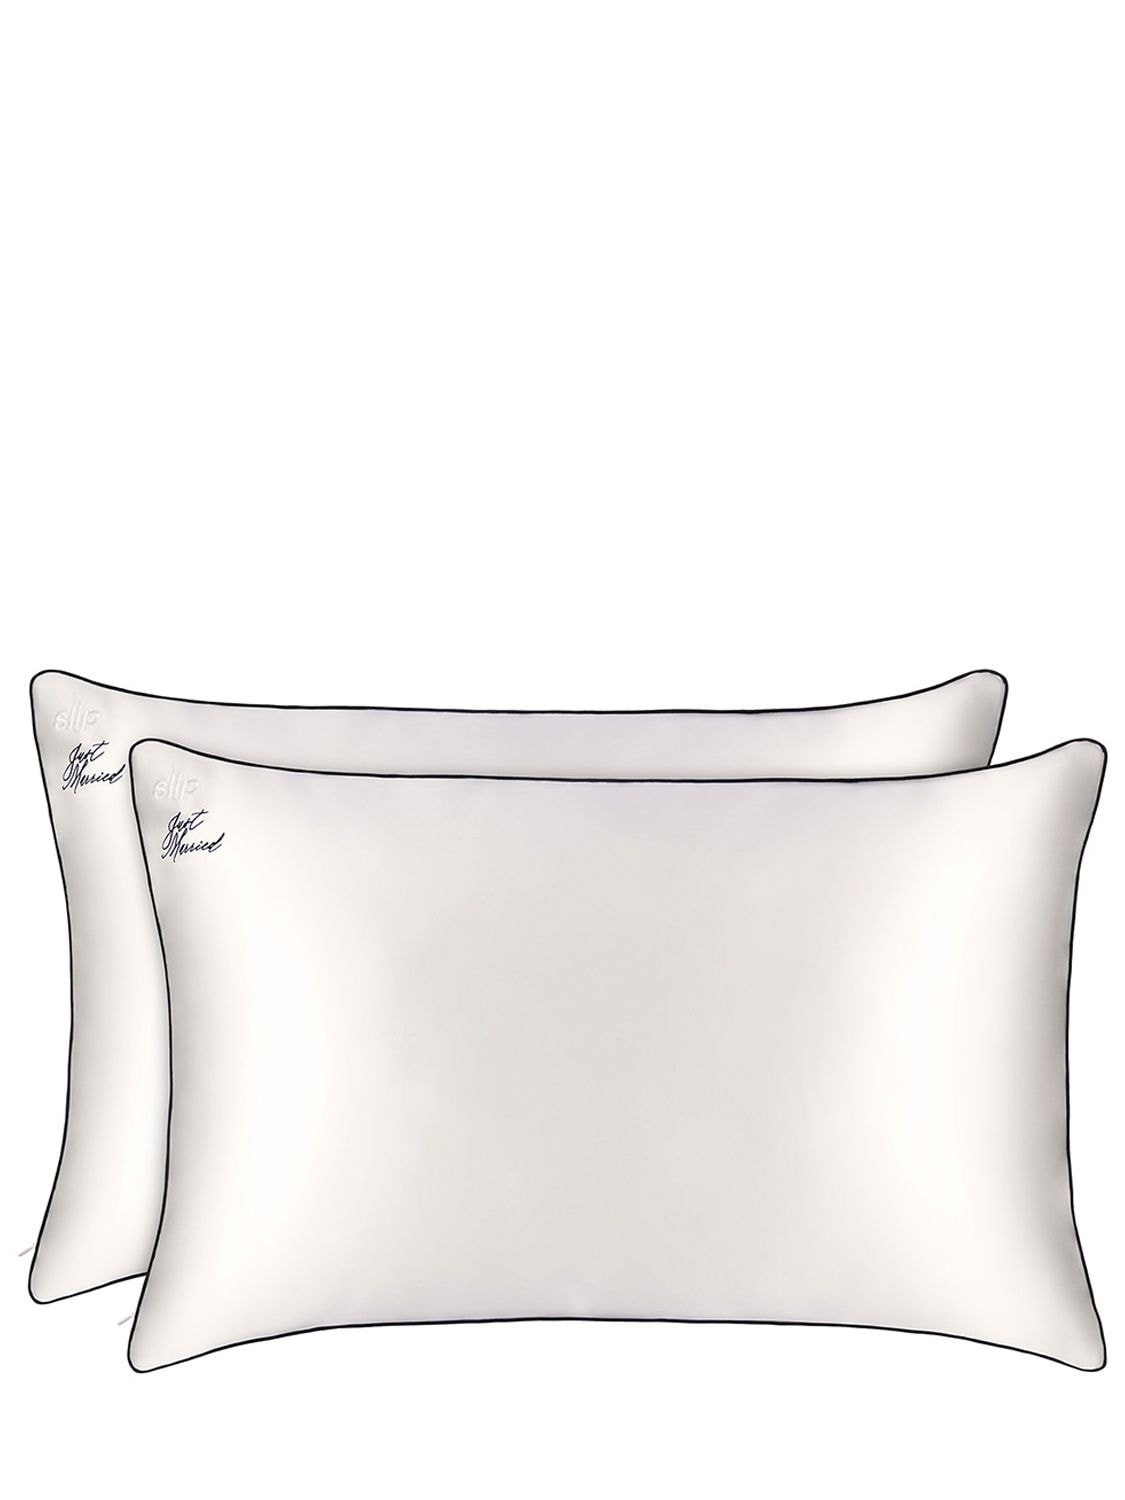 Image of Just Married Pillowcase Duo Set